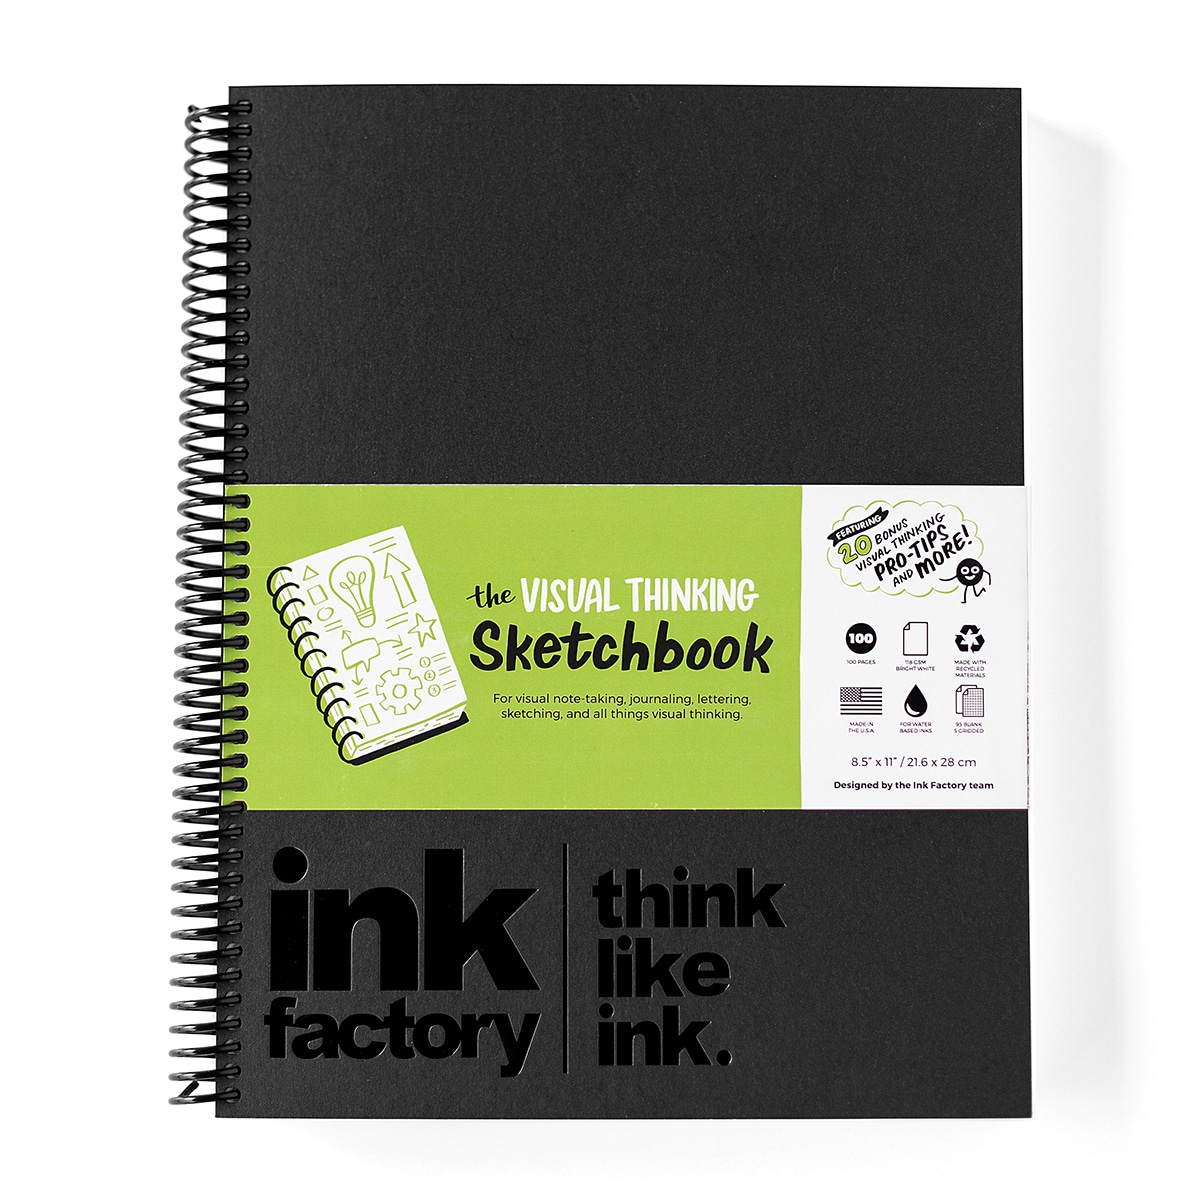 A photo of the ultimate sketchnoting supply - the visual thinking sketchbook